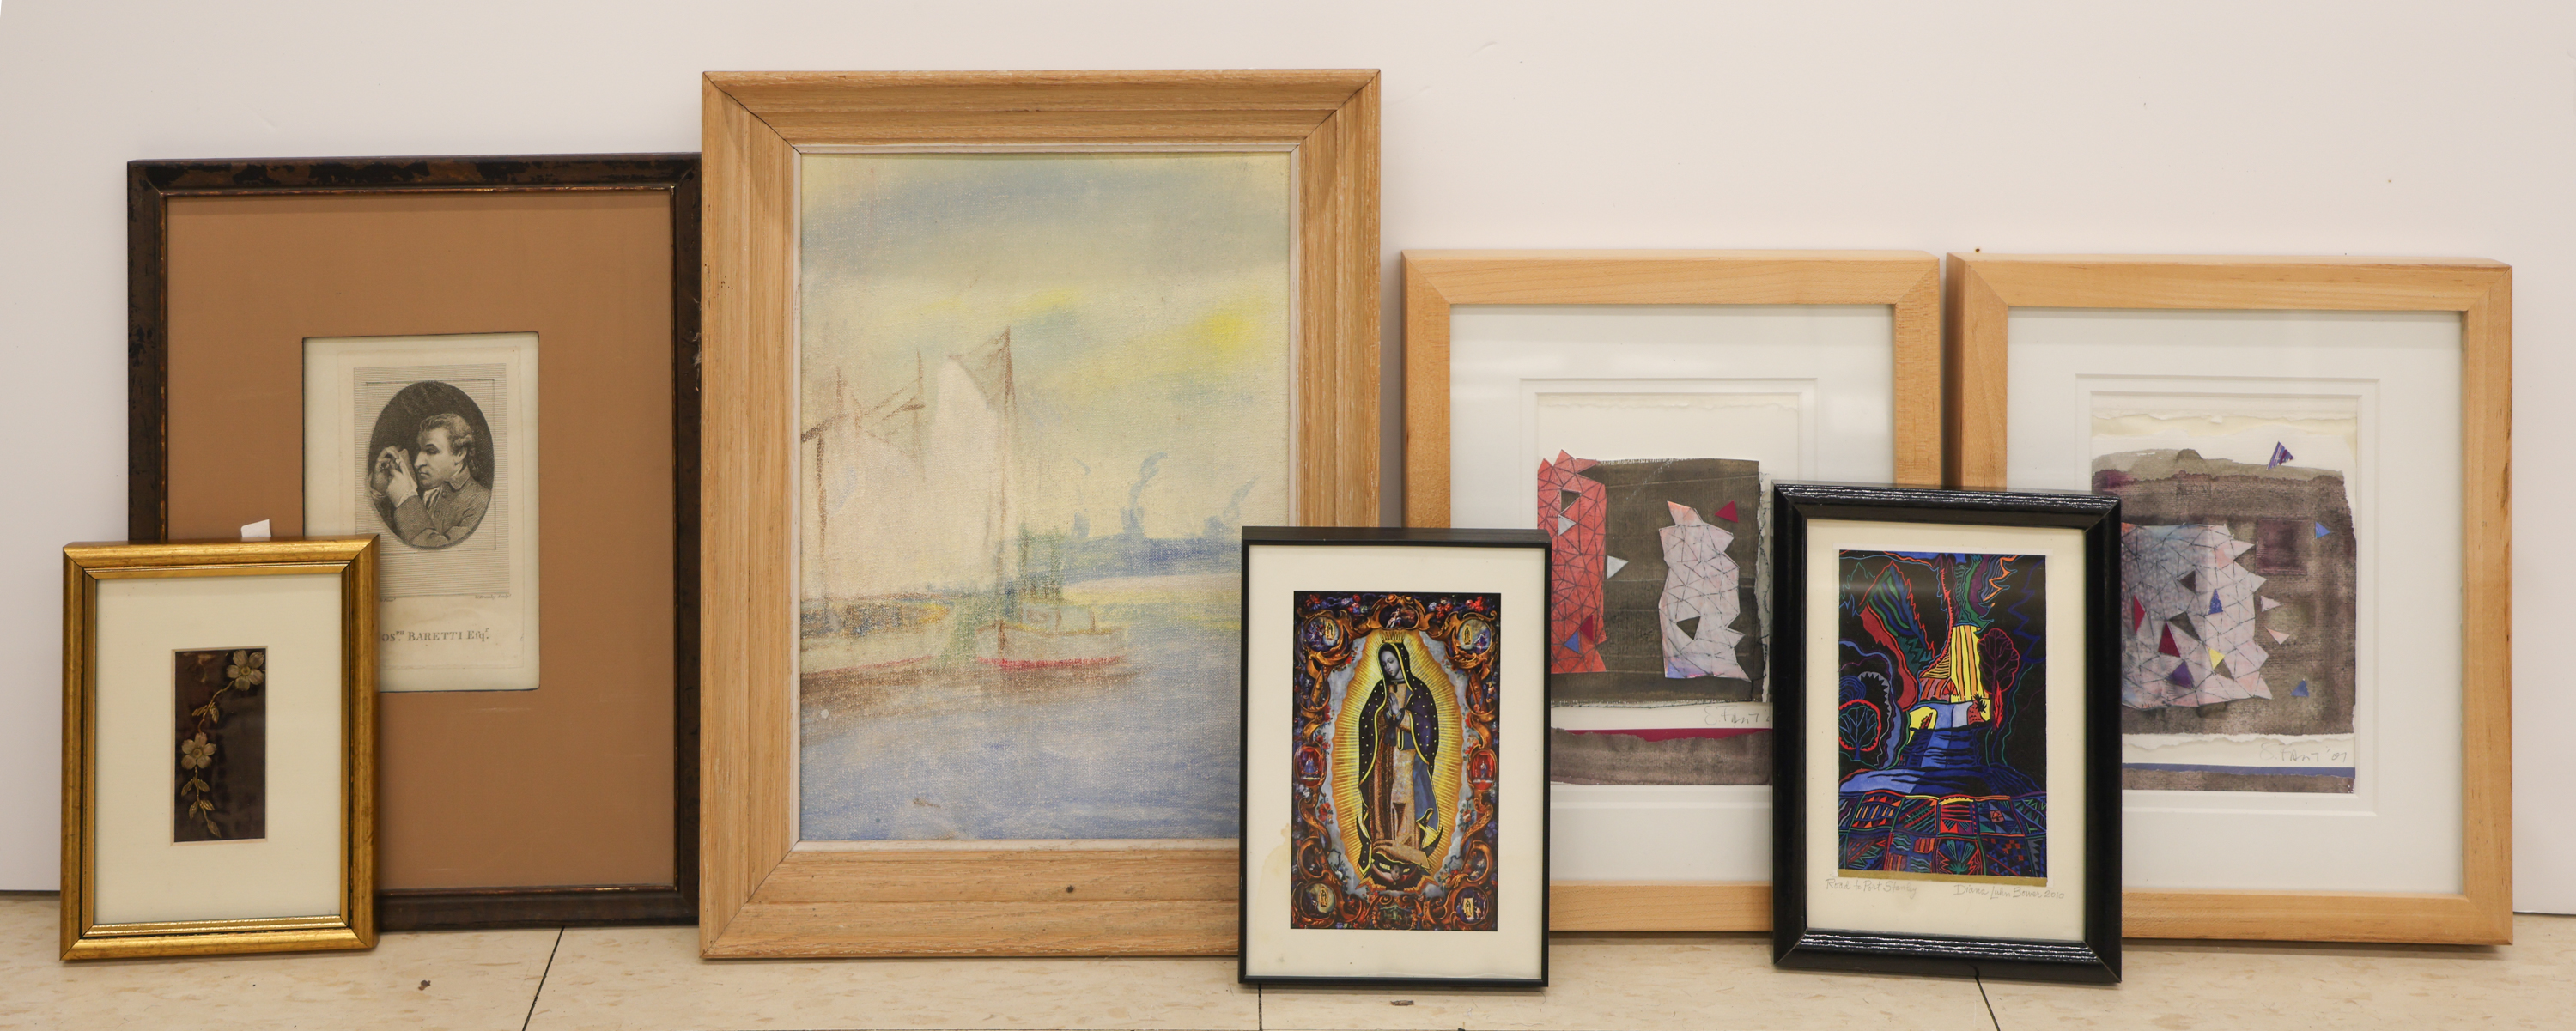 7pc Small Framed Modern & Antique